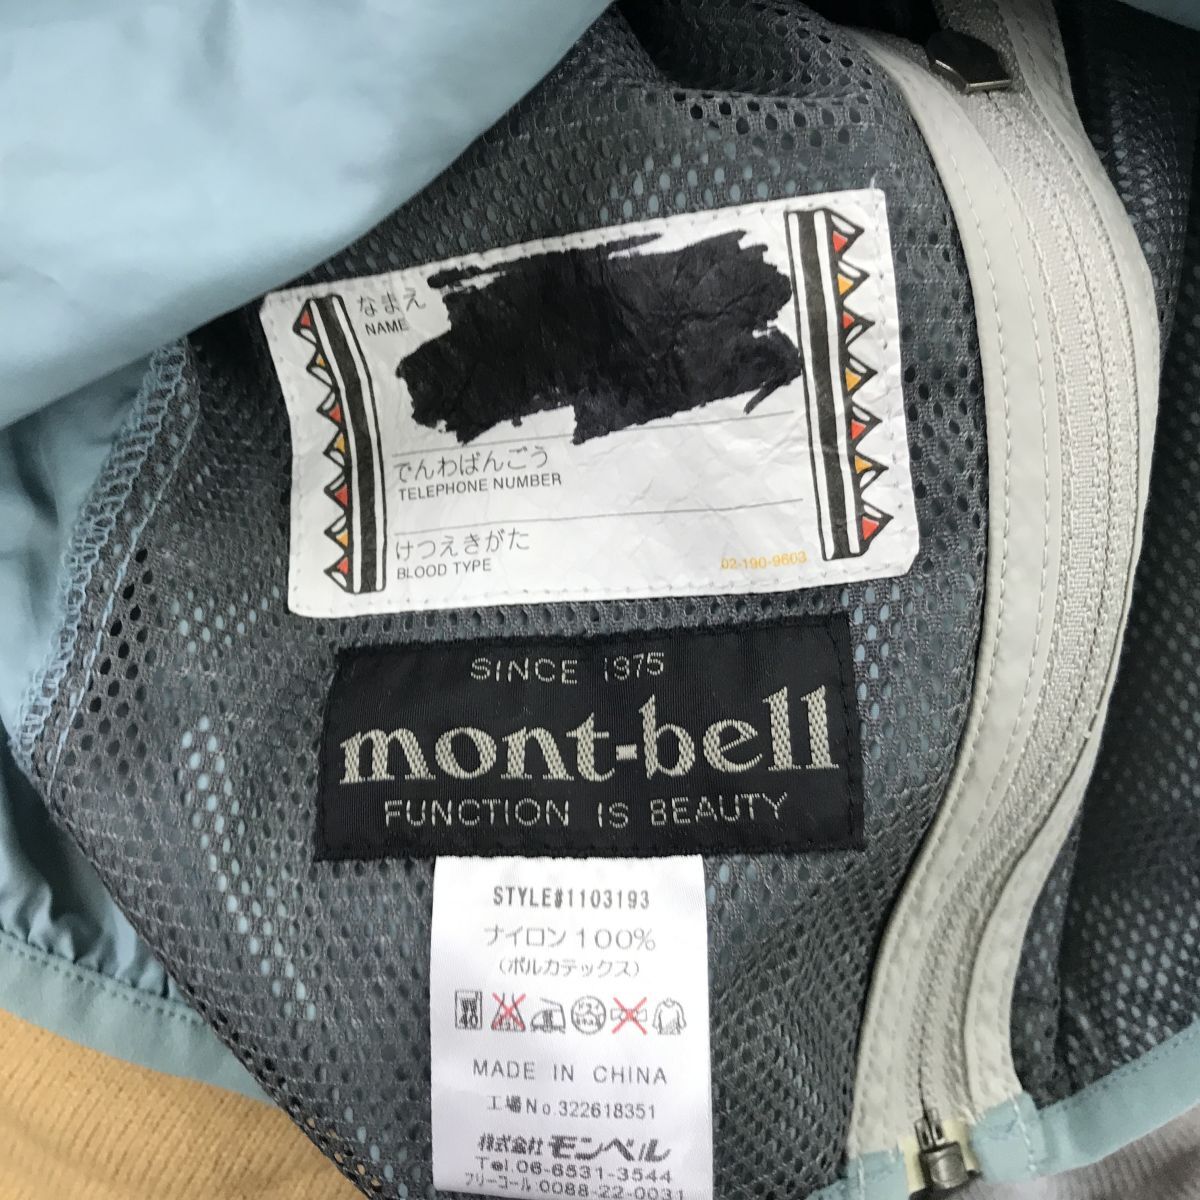 F1178-N◆ mont-bell モンベル ウインドブレーカー フーディー キッズ 子供服 ◆ size120 ライトブルー ナイロン100_画像8